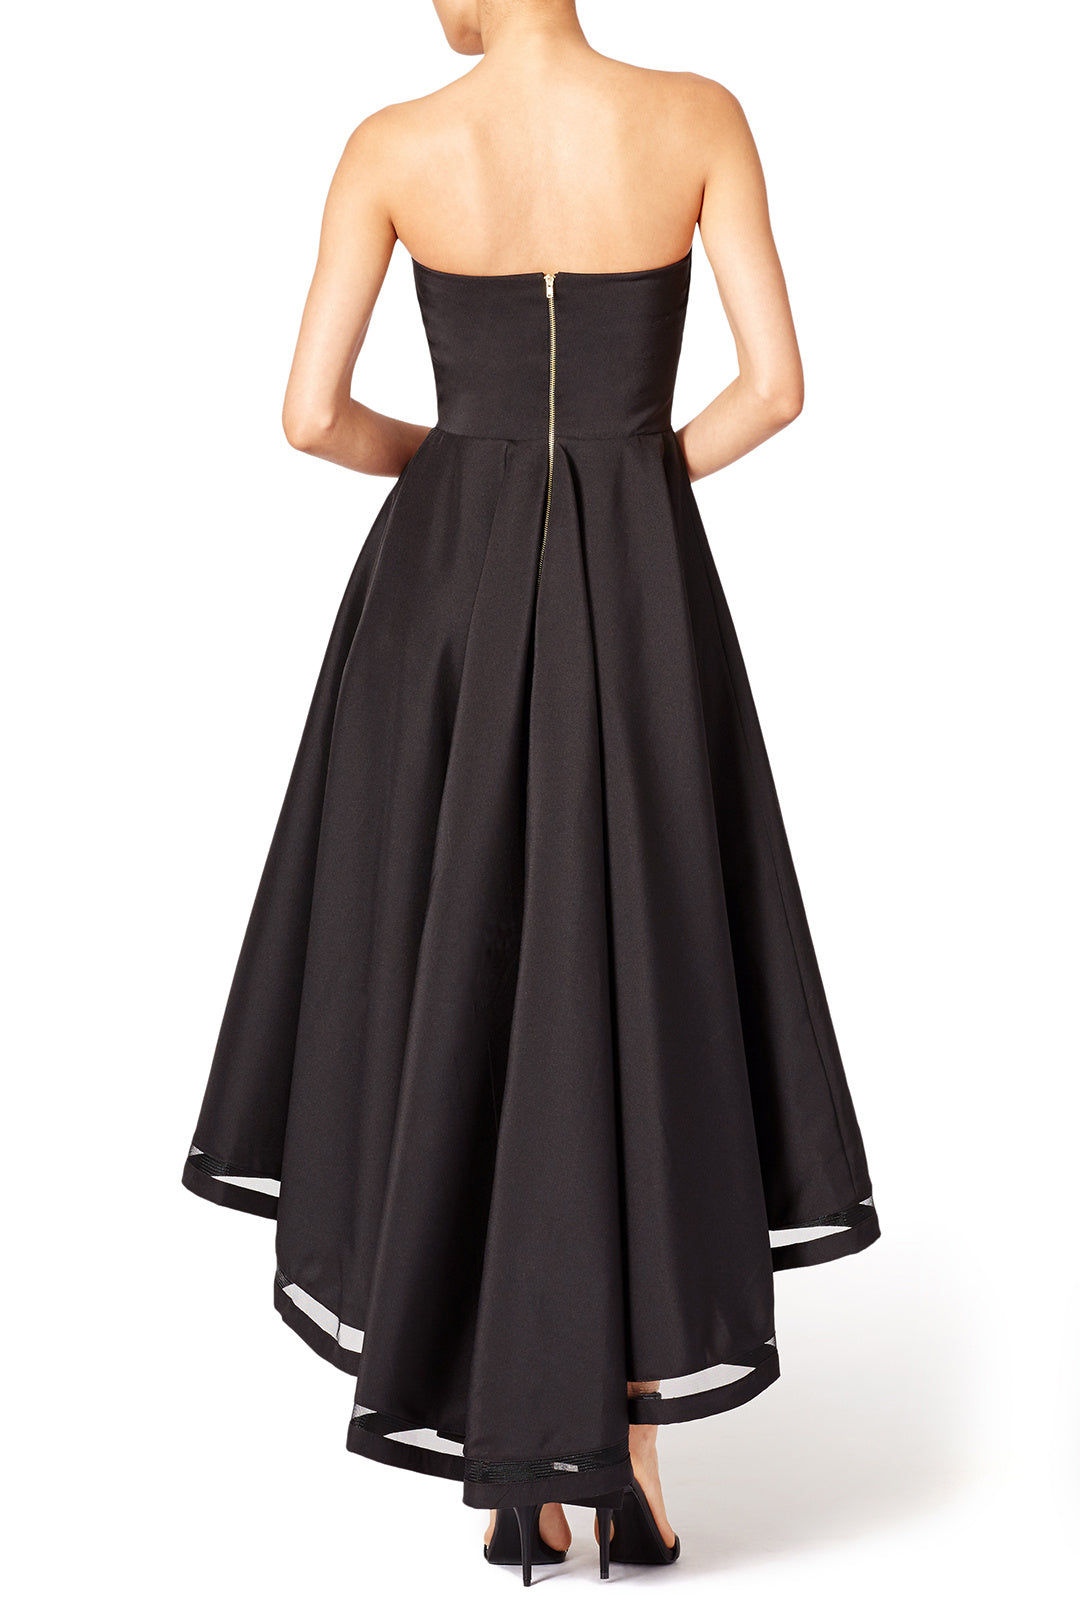 Strapless Black Hi-Lo Prom Dresses with Open Back